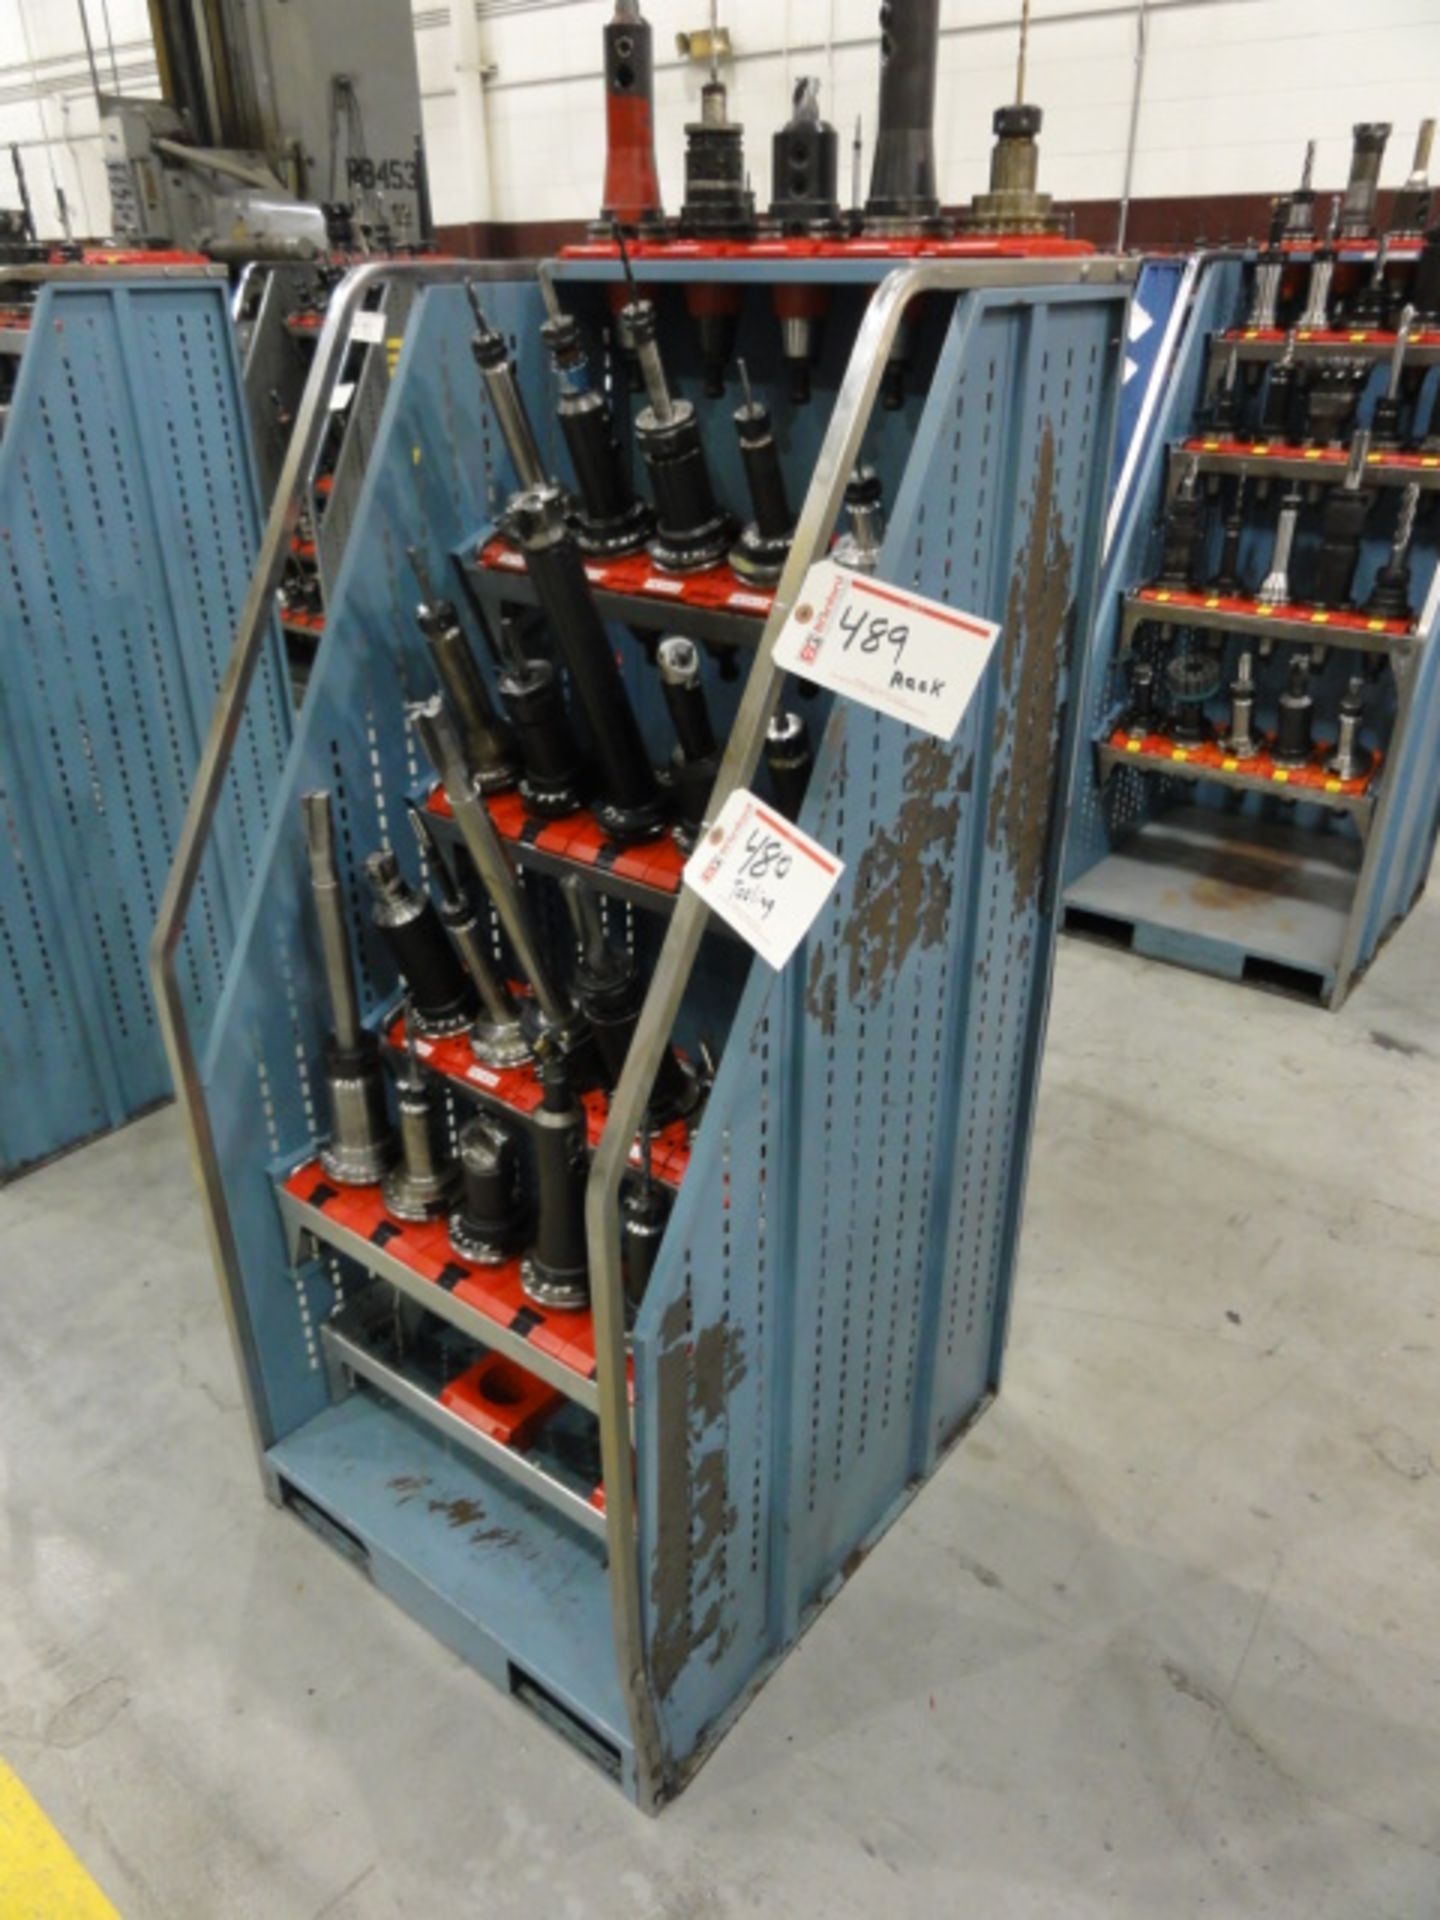 Stationary Adjustable Shelf CAT 50 Tool Racks w/ Forklift Mounts, Delayed Delivery Upon Removal of - Image 2 of 2